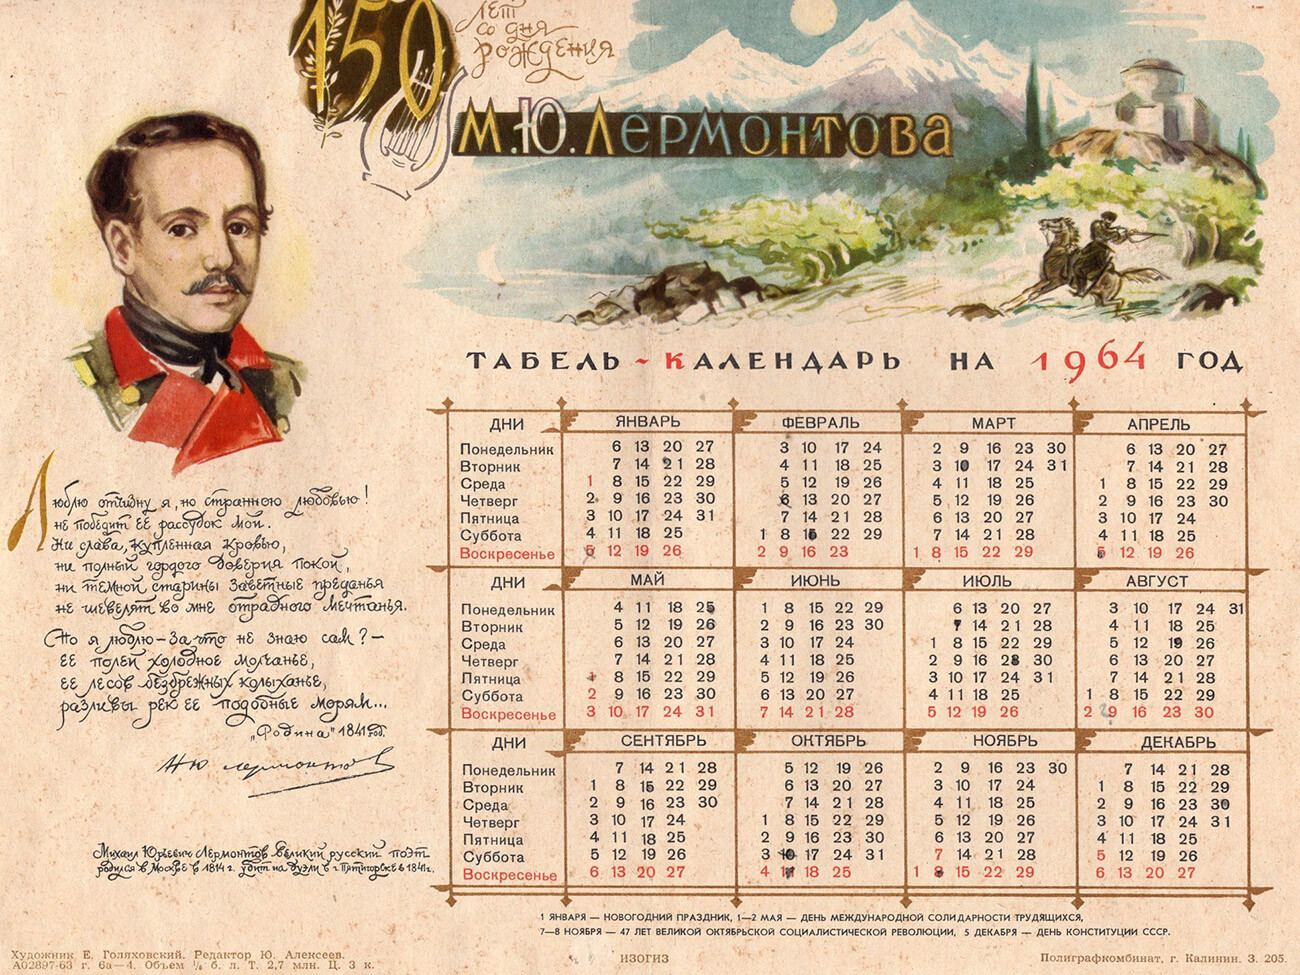 A 1964 Soviet calendar (dedicated to the 150th anniversary of poet Mikhail Lermontov), with 7-day weeks beginning on Monday